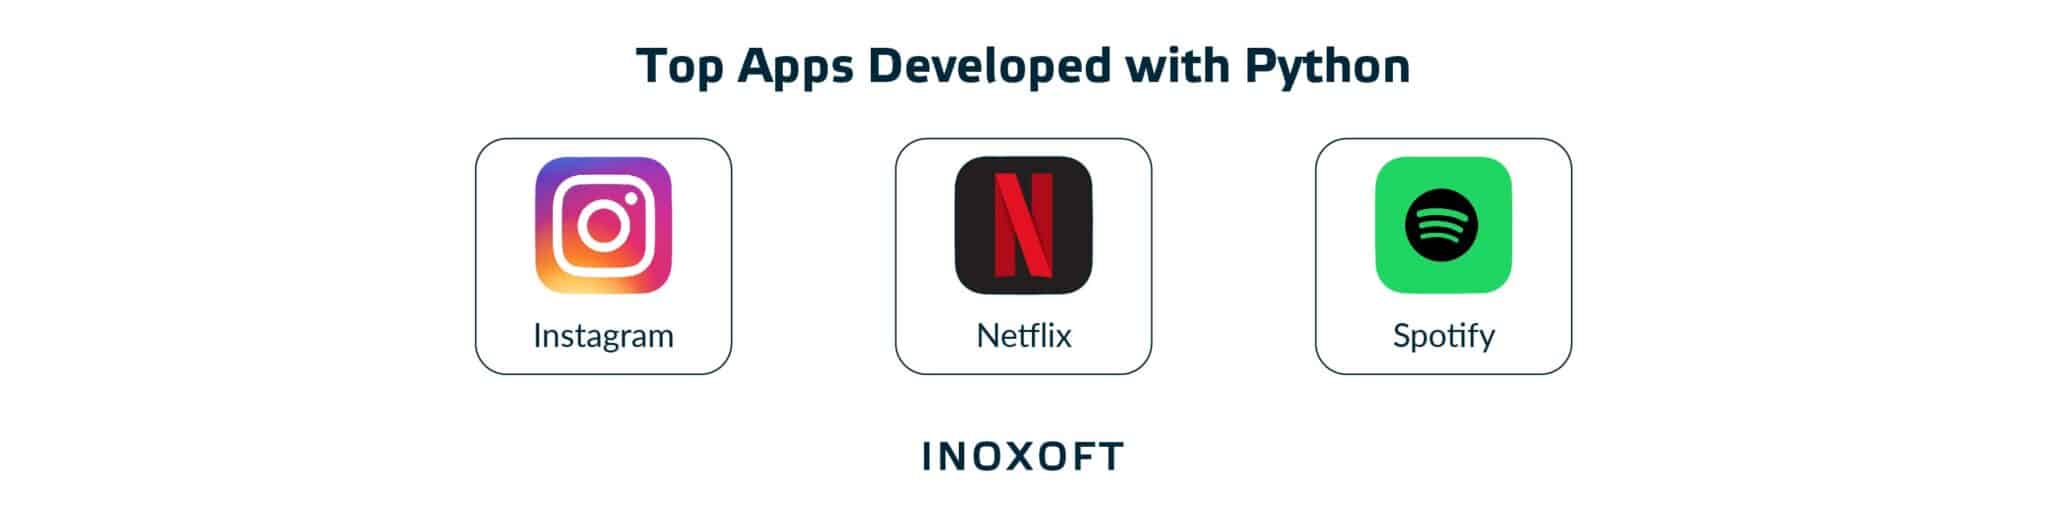 Top Apps Developed with Python